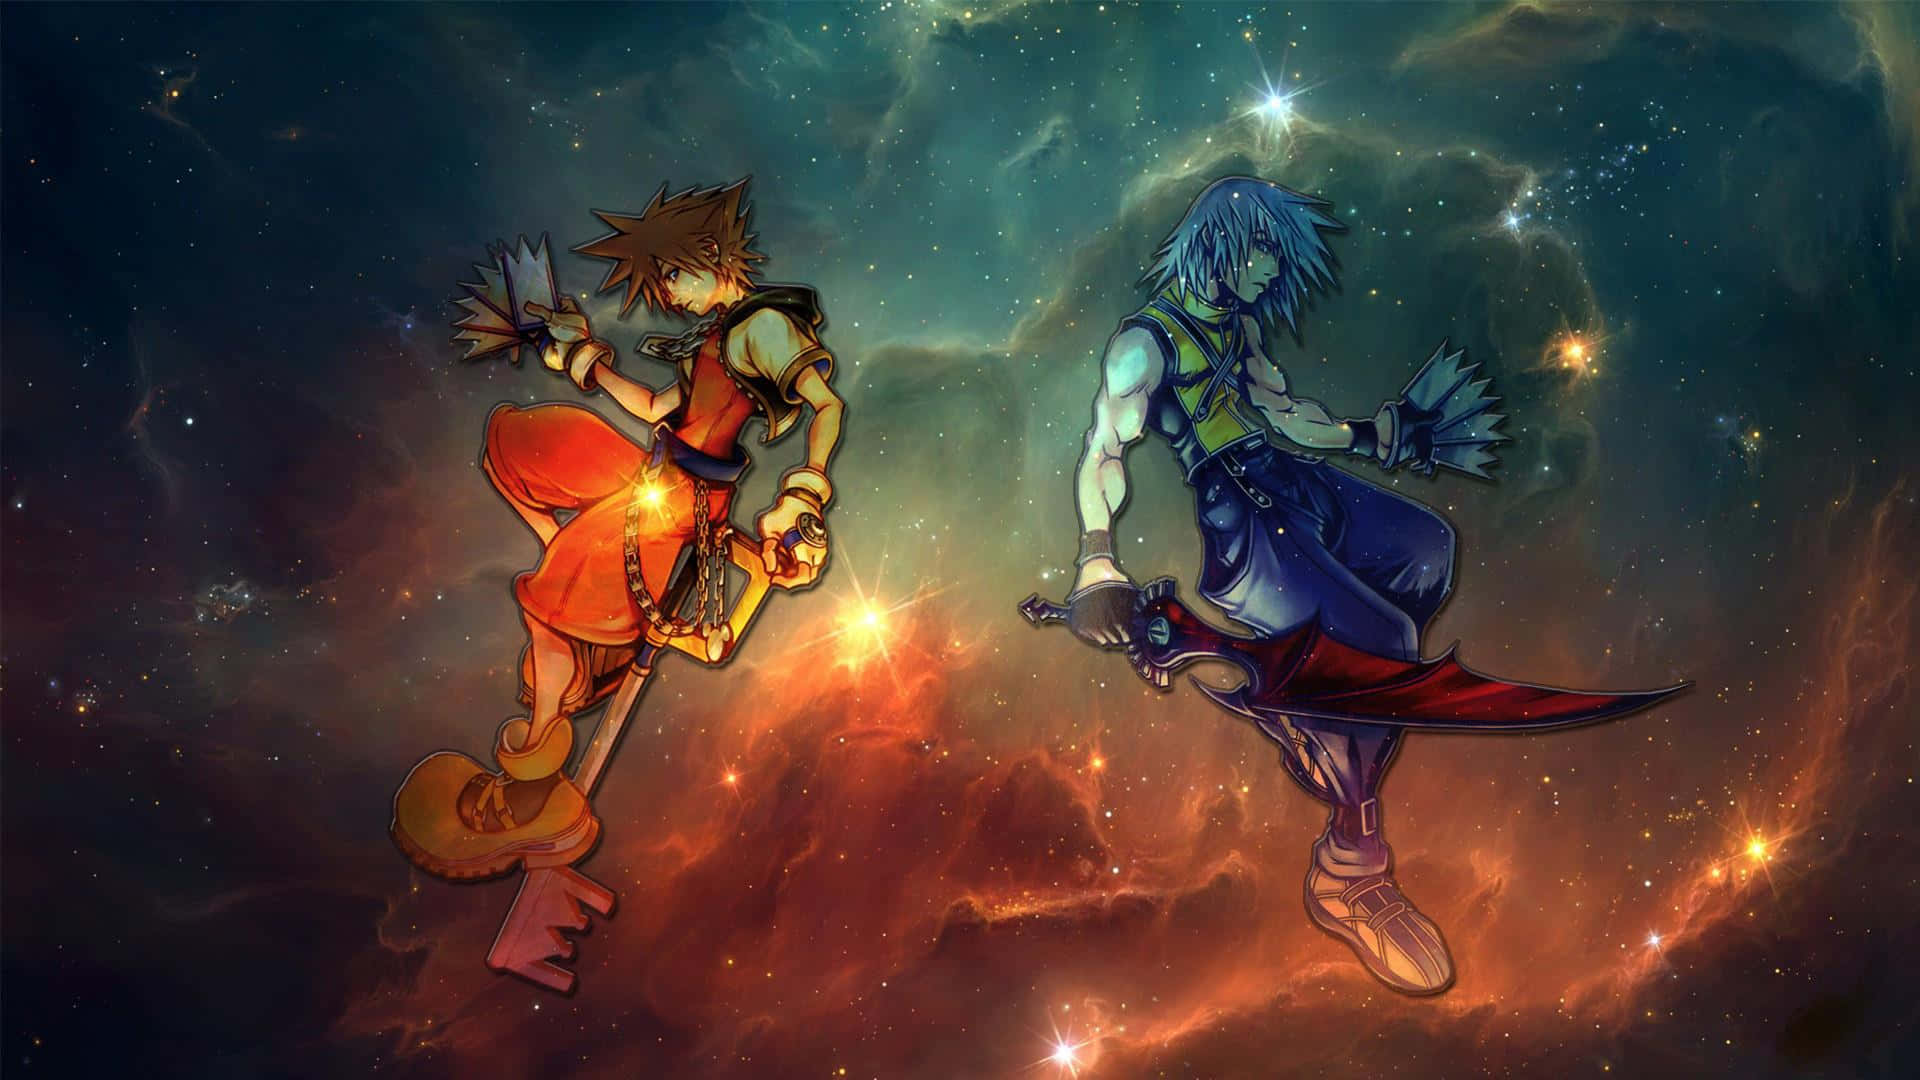 Riku from Kingdom Hearts standing strong against a mystical backdrop Wallpaper